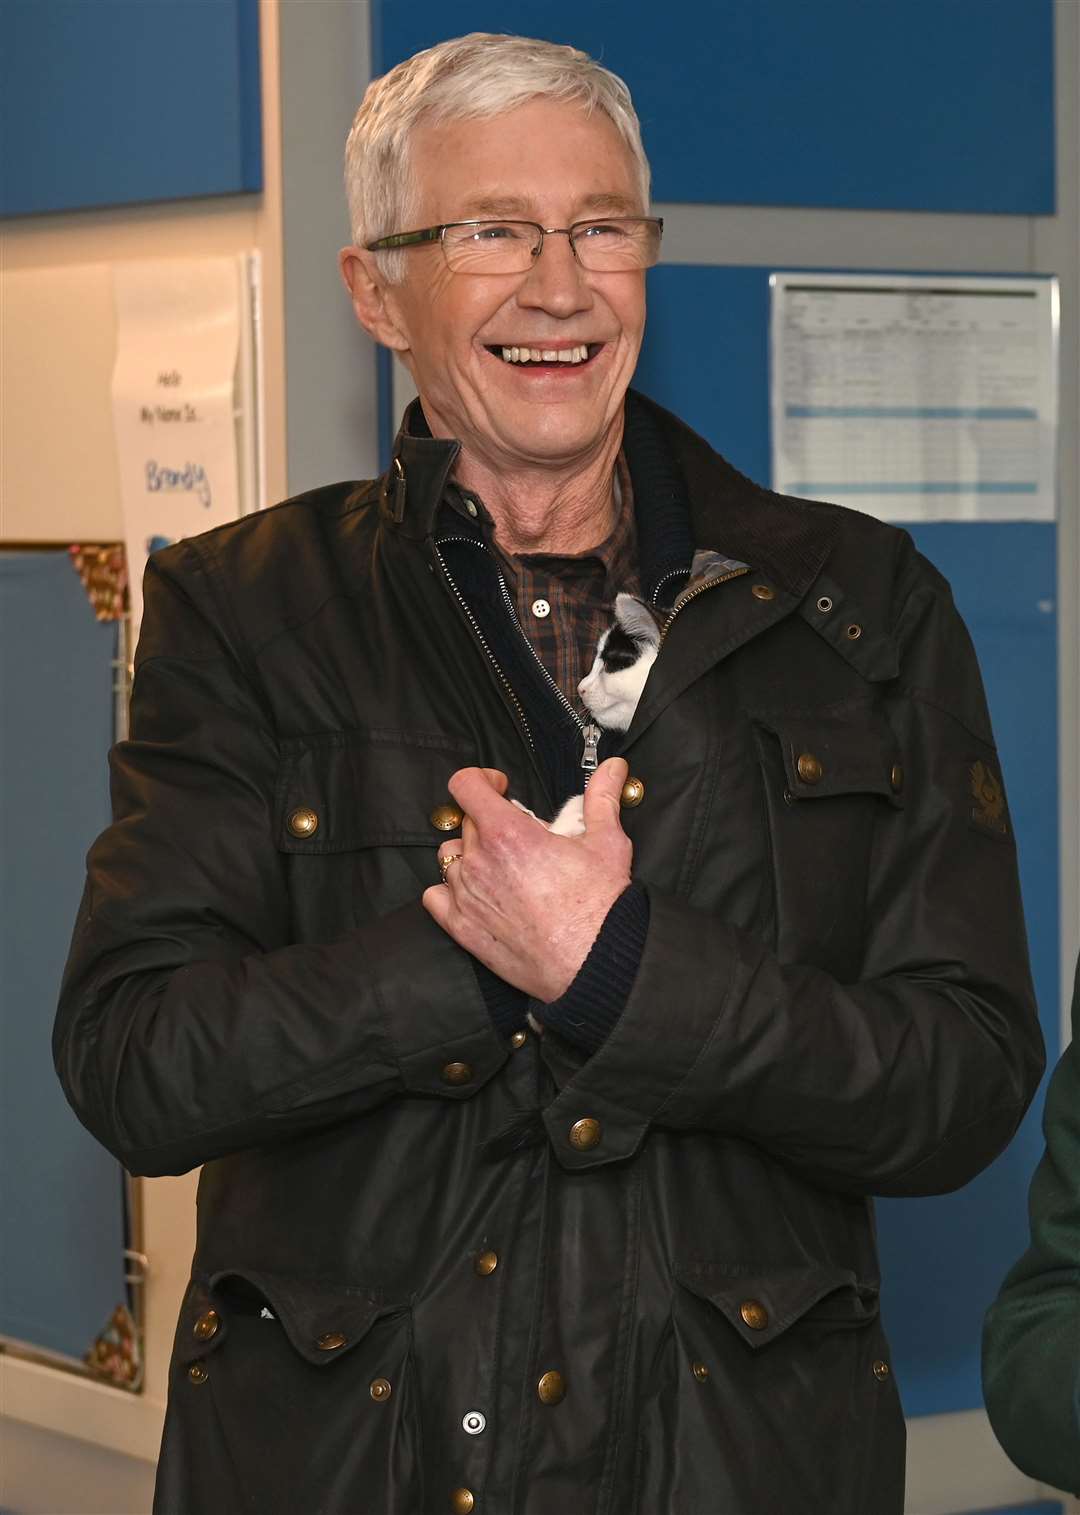 Paul O’Grady during a visit to the Battersea Dogs and Cats Home in Brands Hatch, Kent (PA)